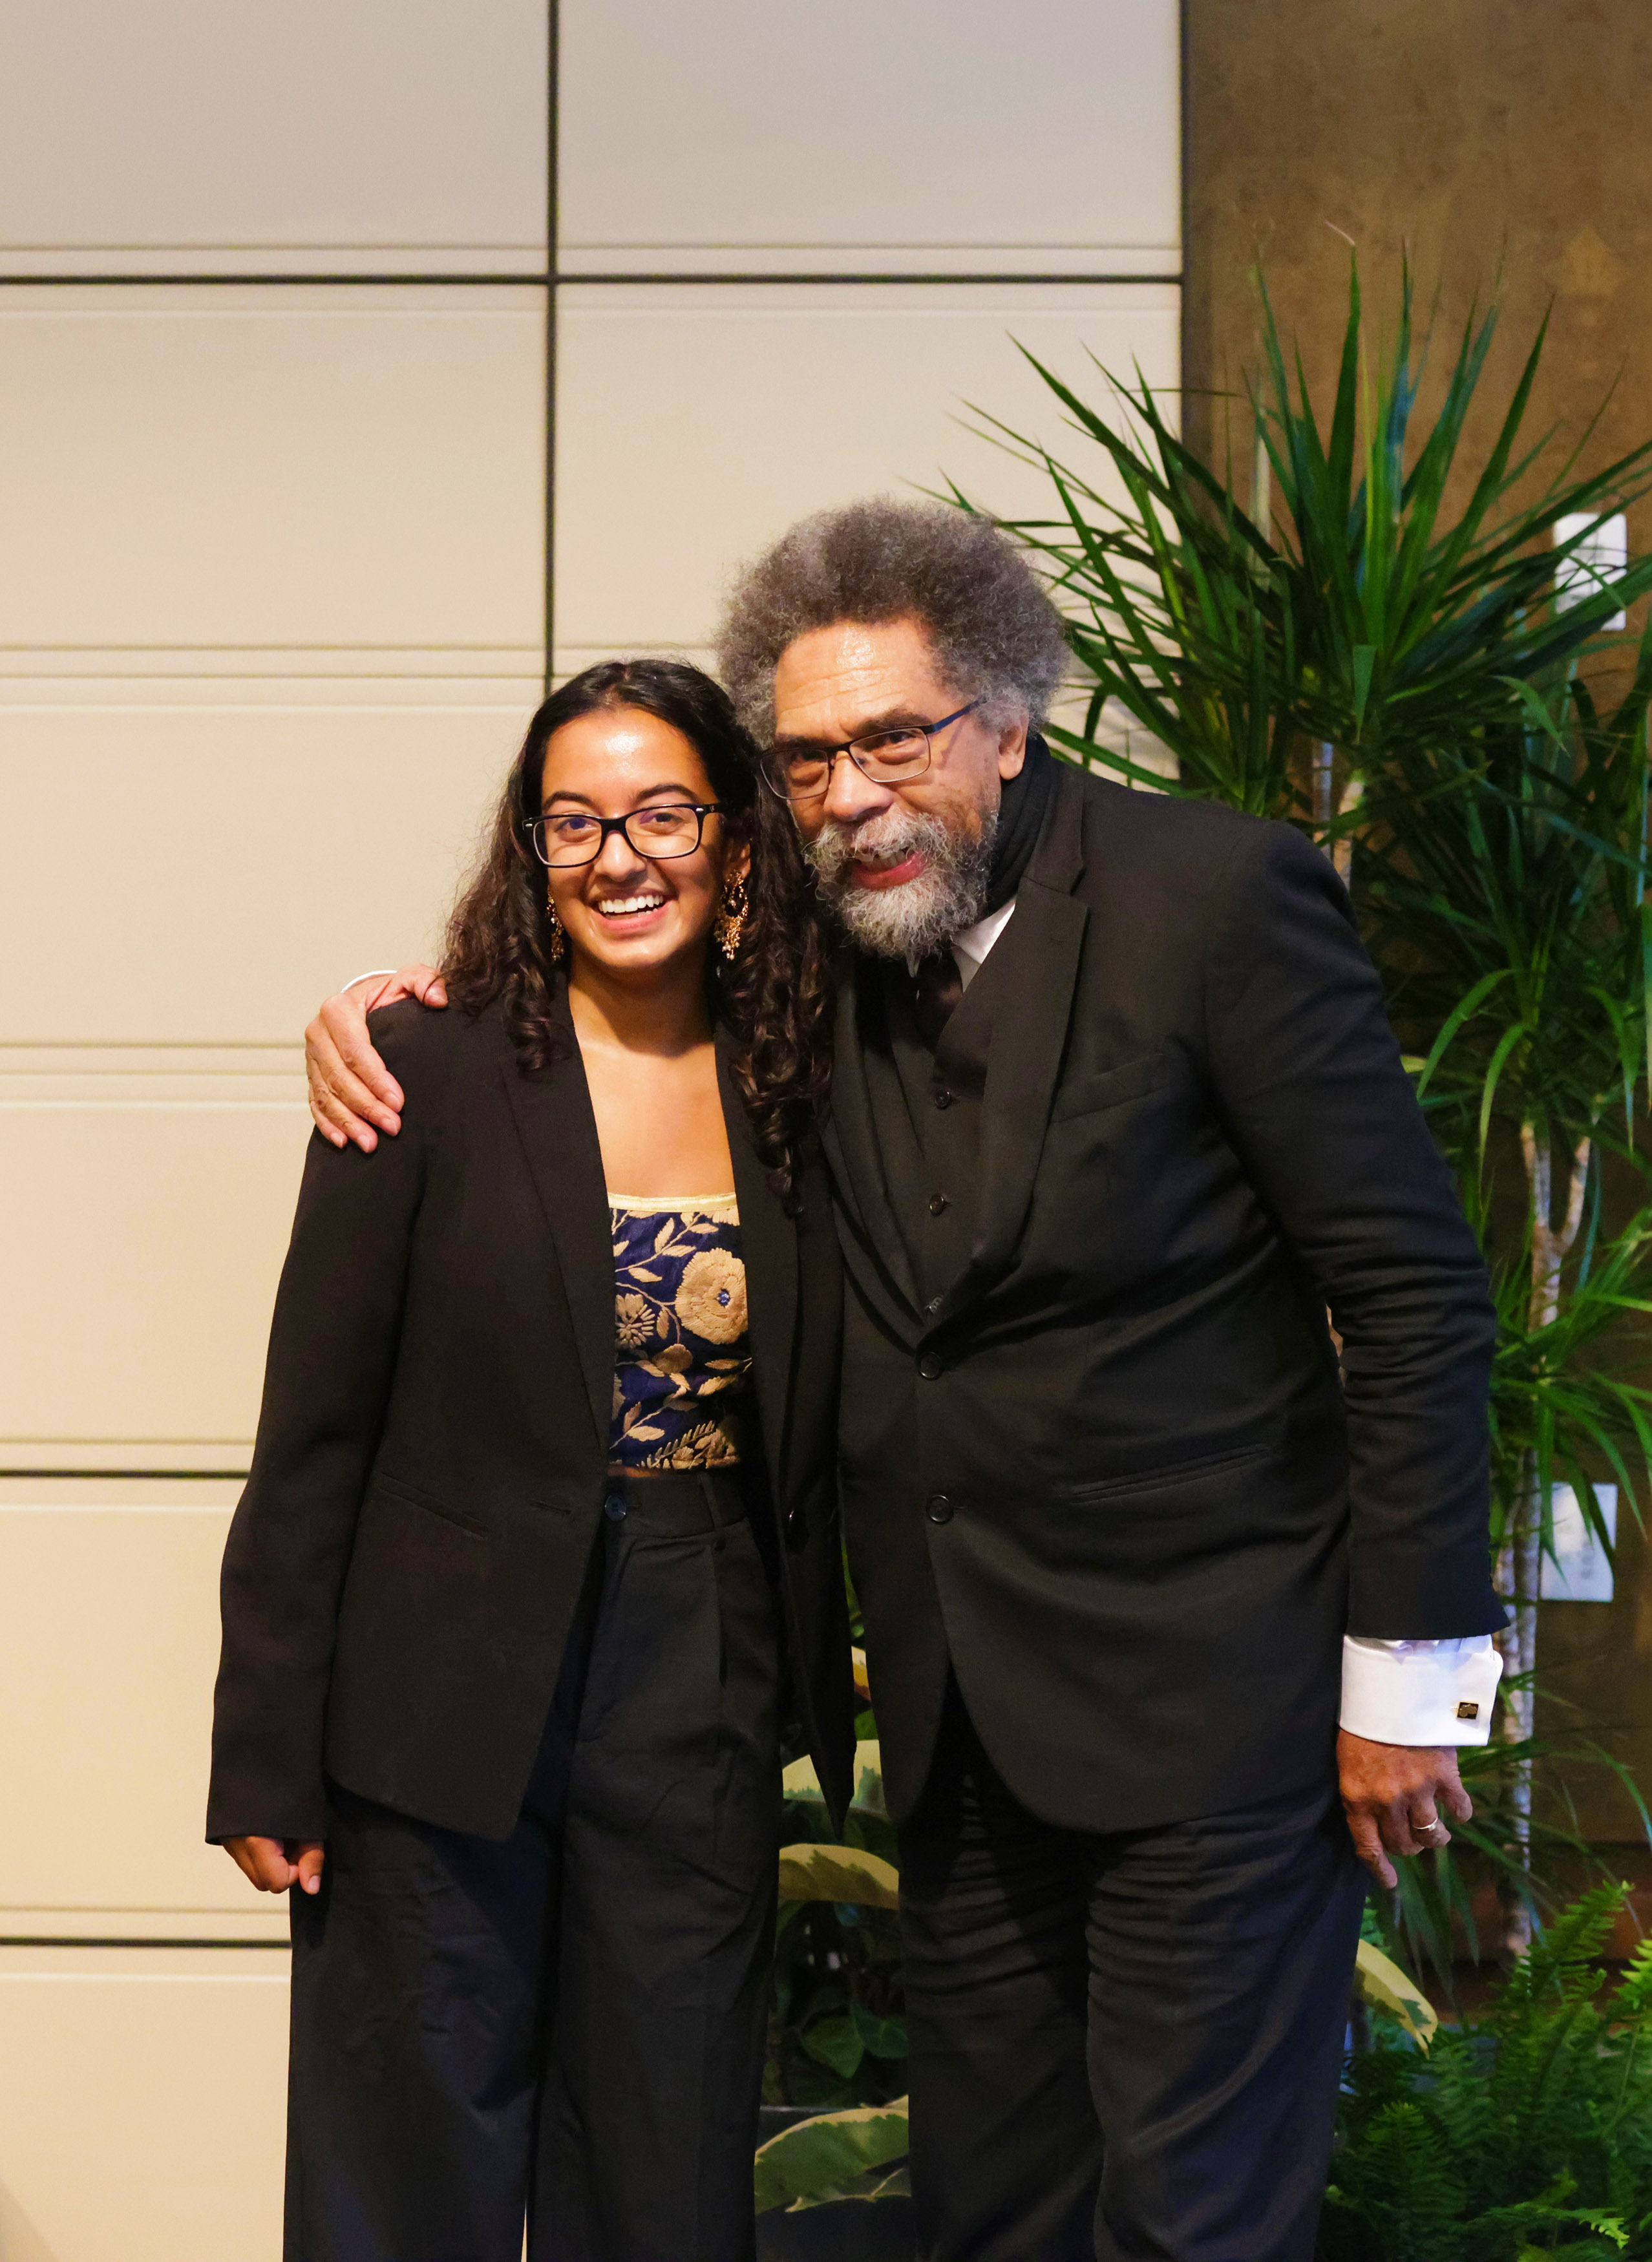 Philosopher and professor Cornel West speaking at the Ath.